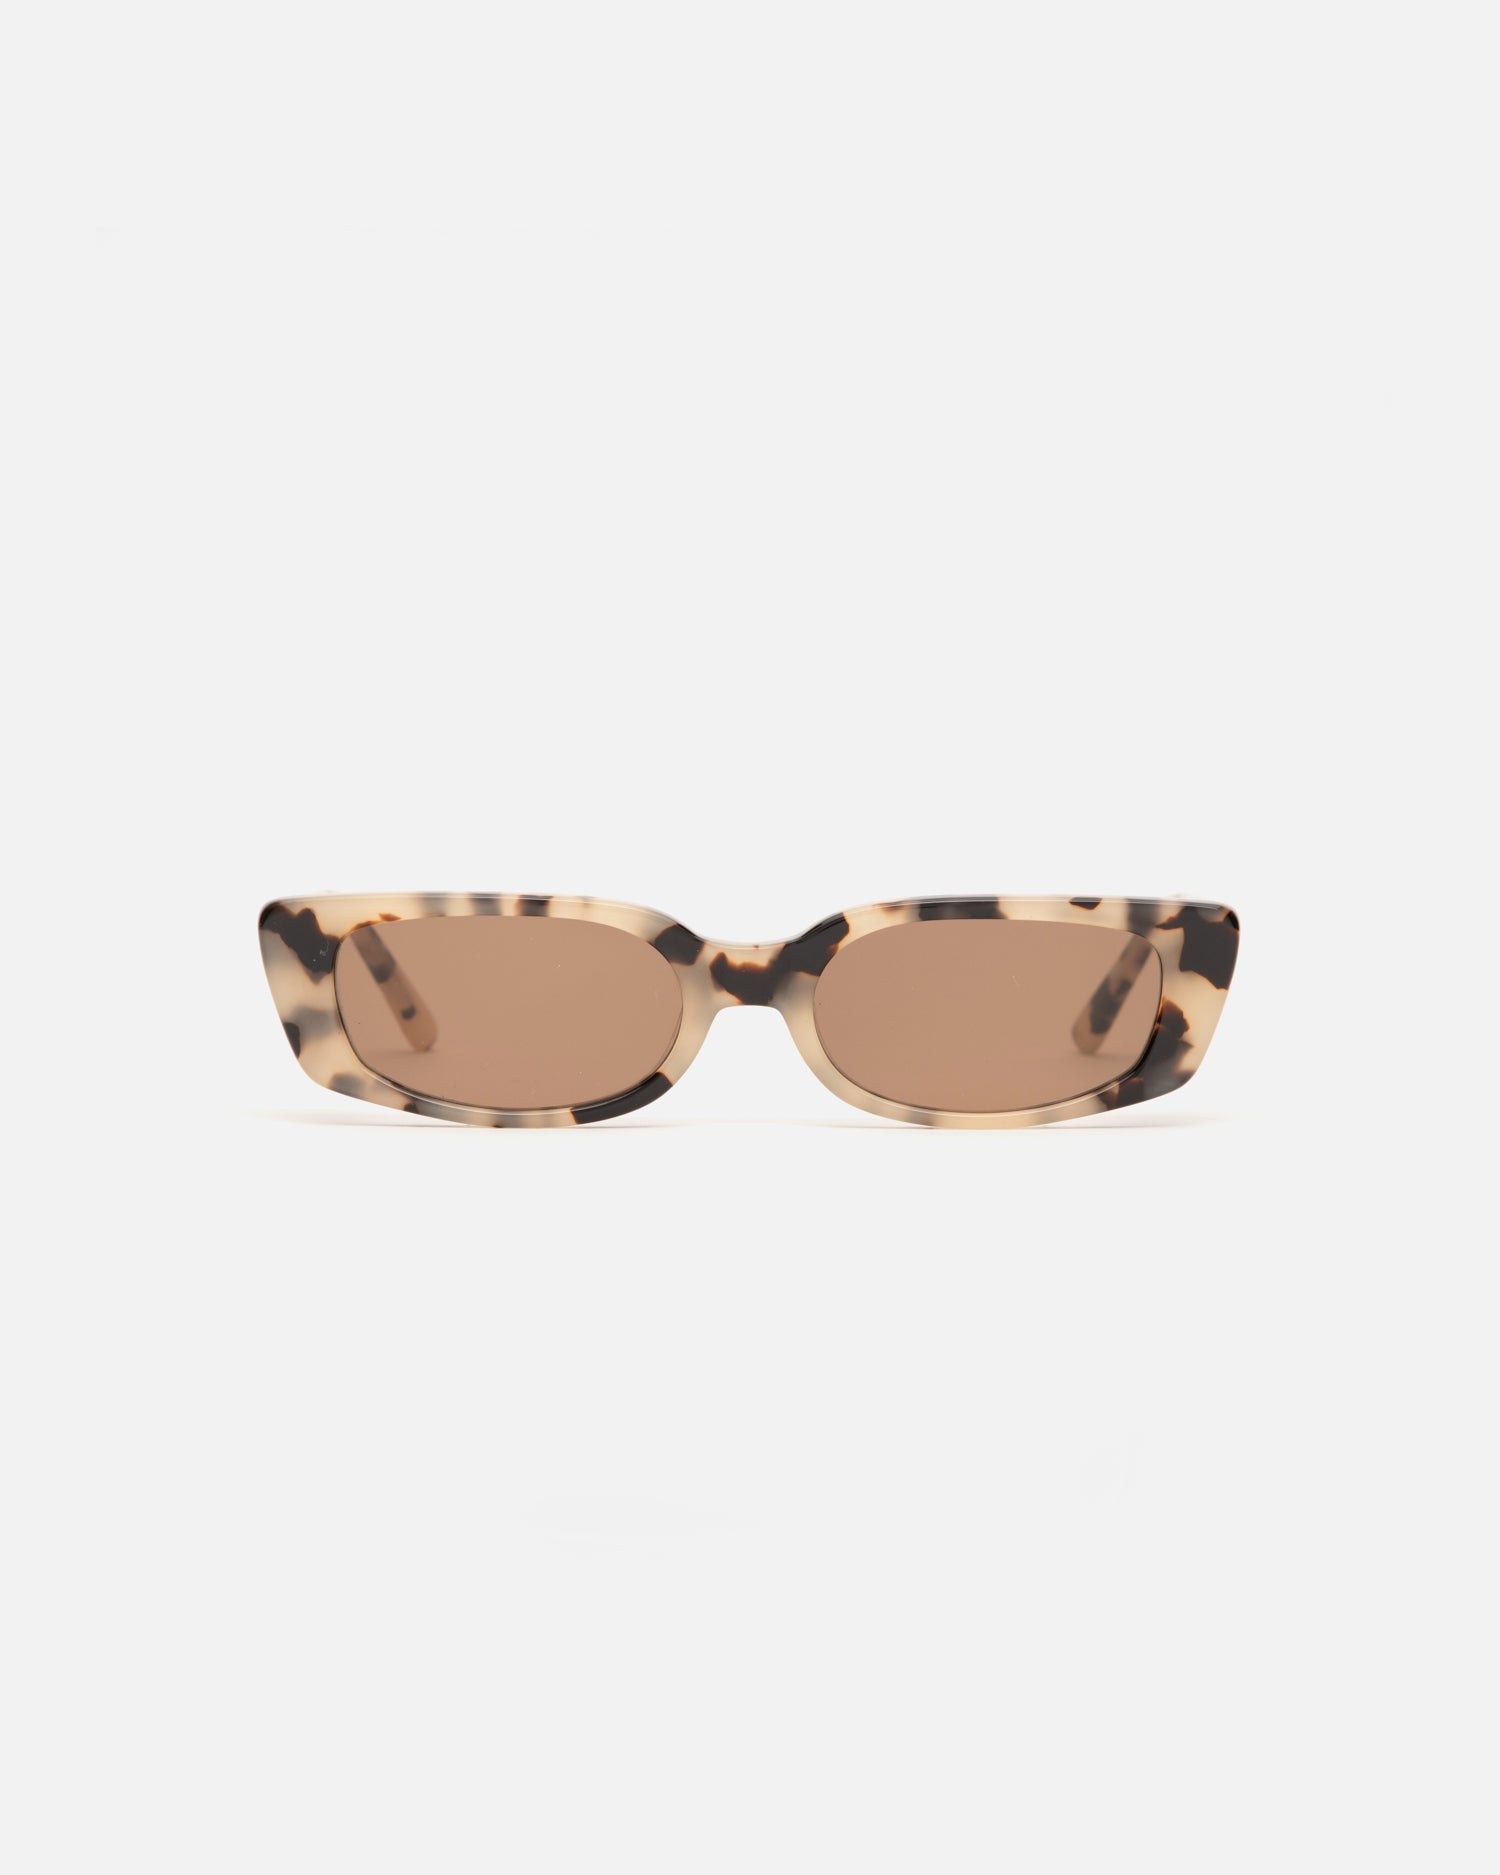 Lu Goldie Sabine Sunglasses in Brown Tortoise shell acetate with brown lenses, front image